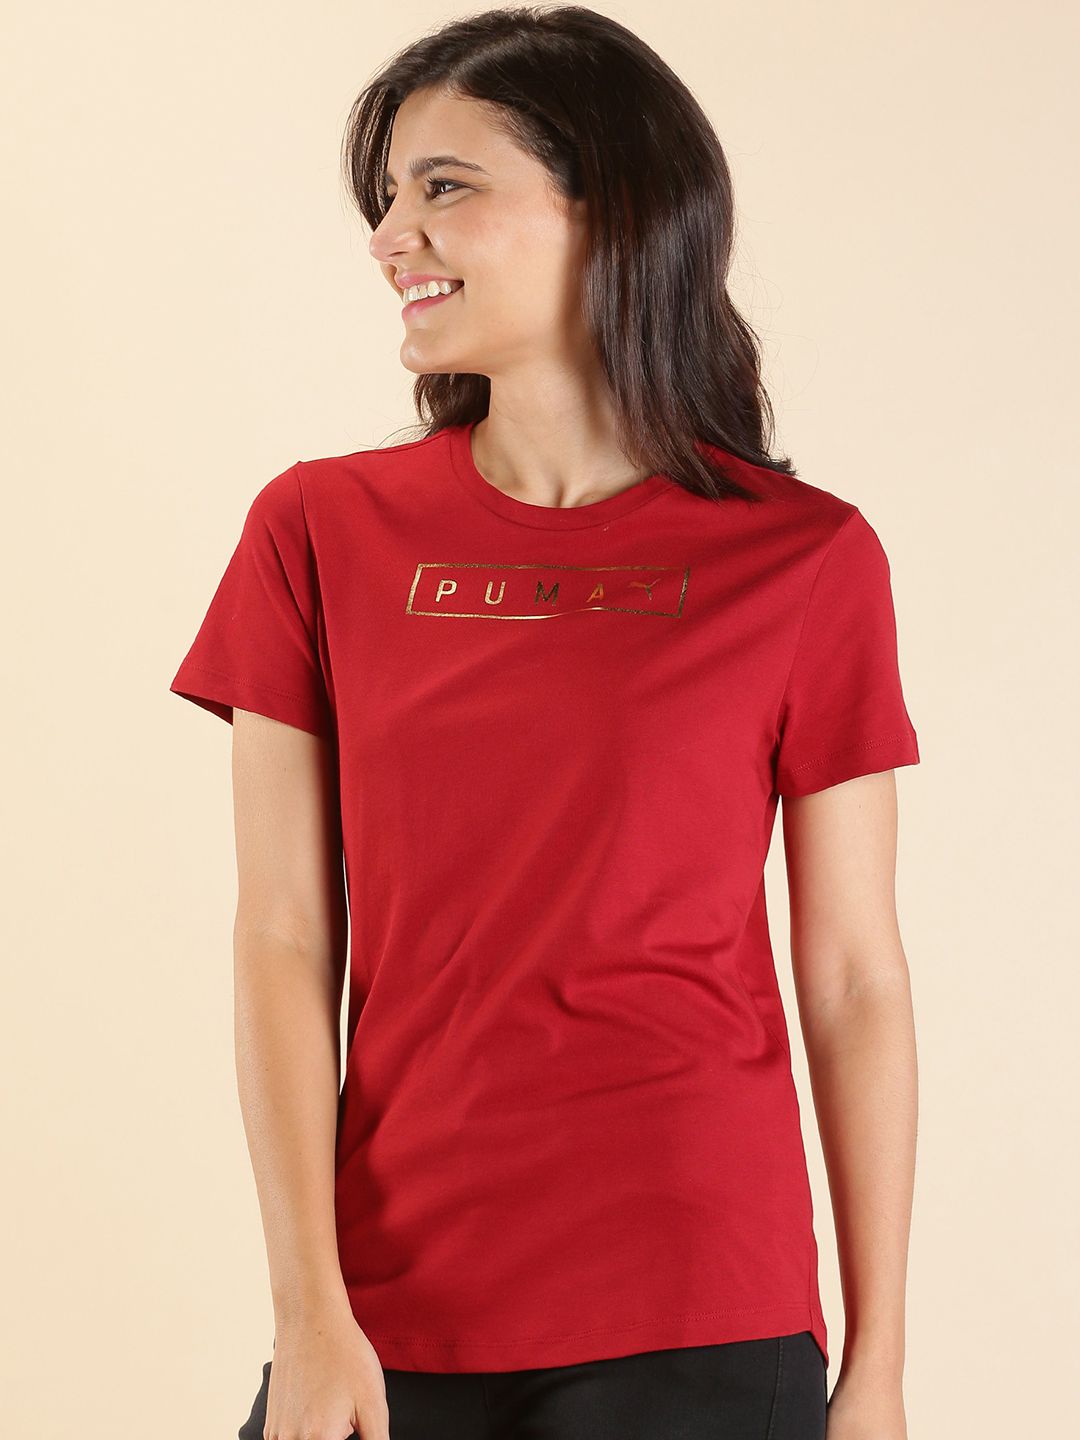 Puma Women Maroon Graphic Tee18 Red Dahli Pure Cotton Printed Pure Cotton T-shirt Price in India